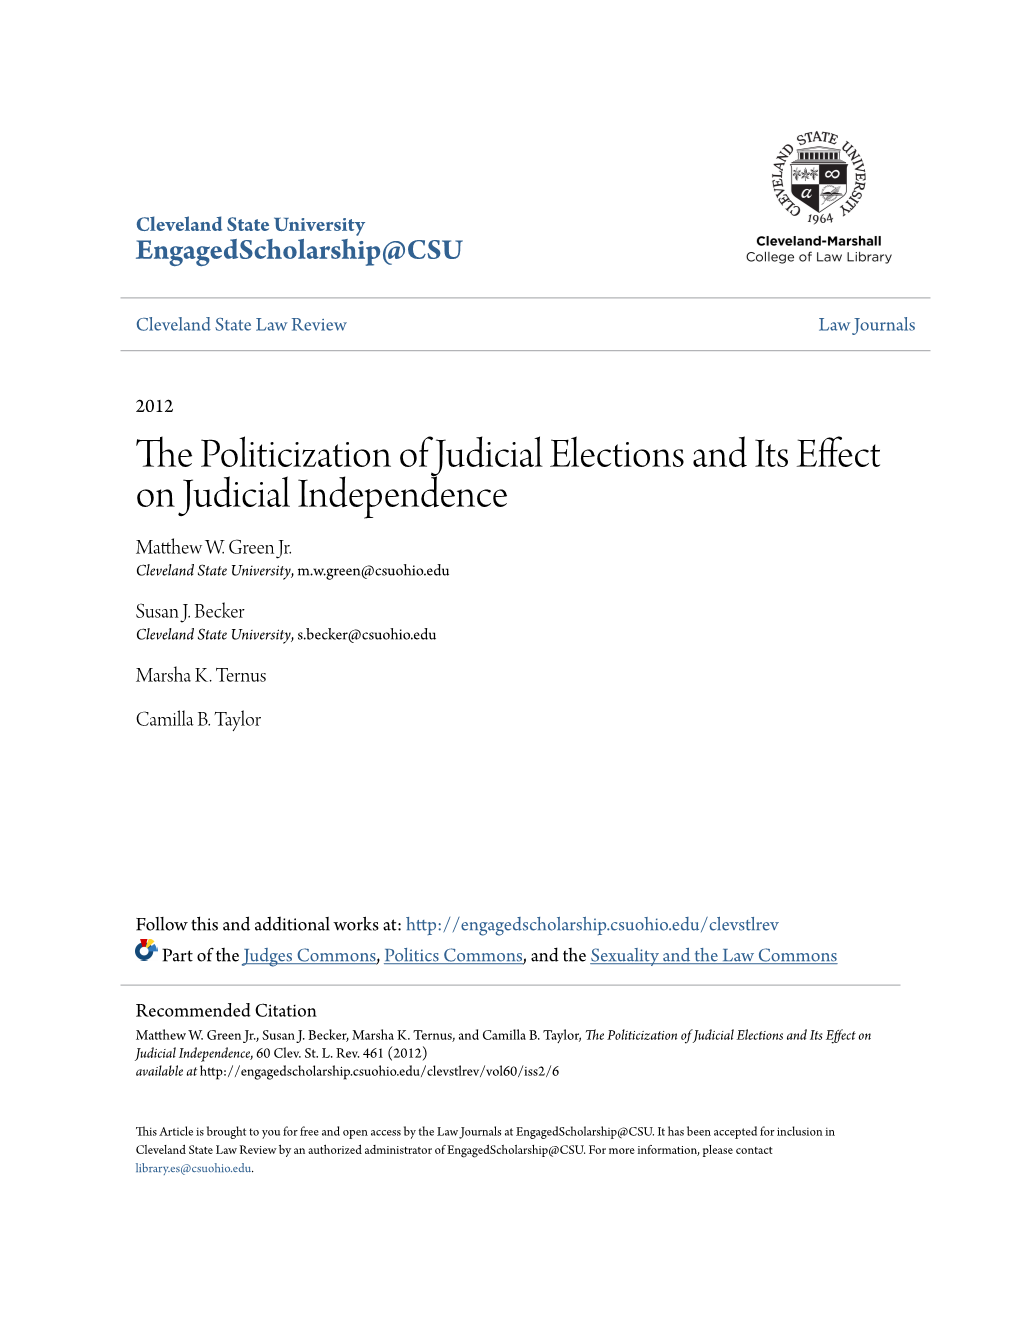 The Politicization of Judicial Elections and Its Effect on Judicial Independence, 60 Clev